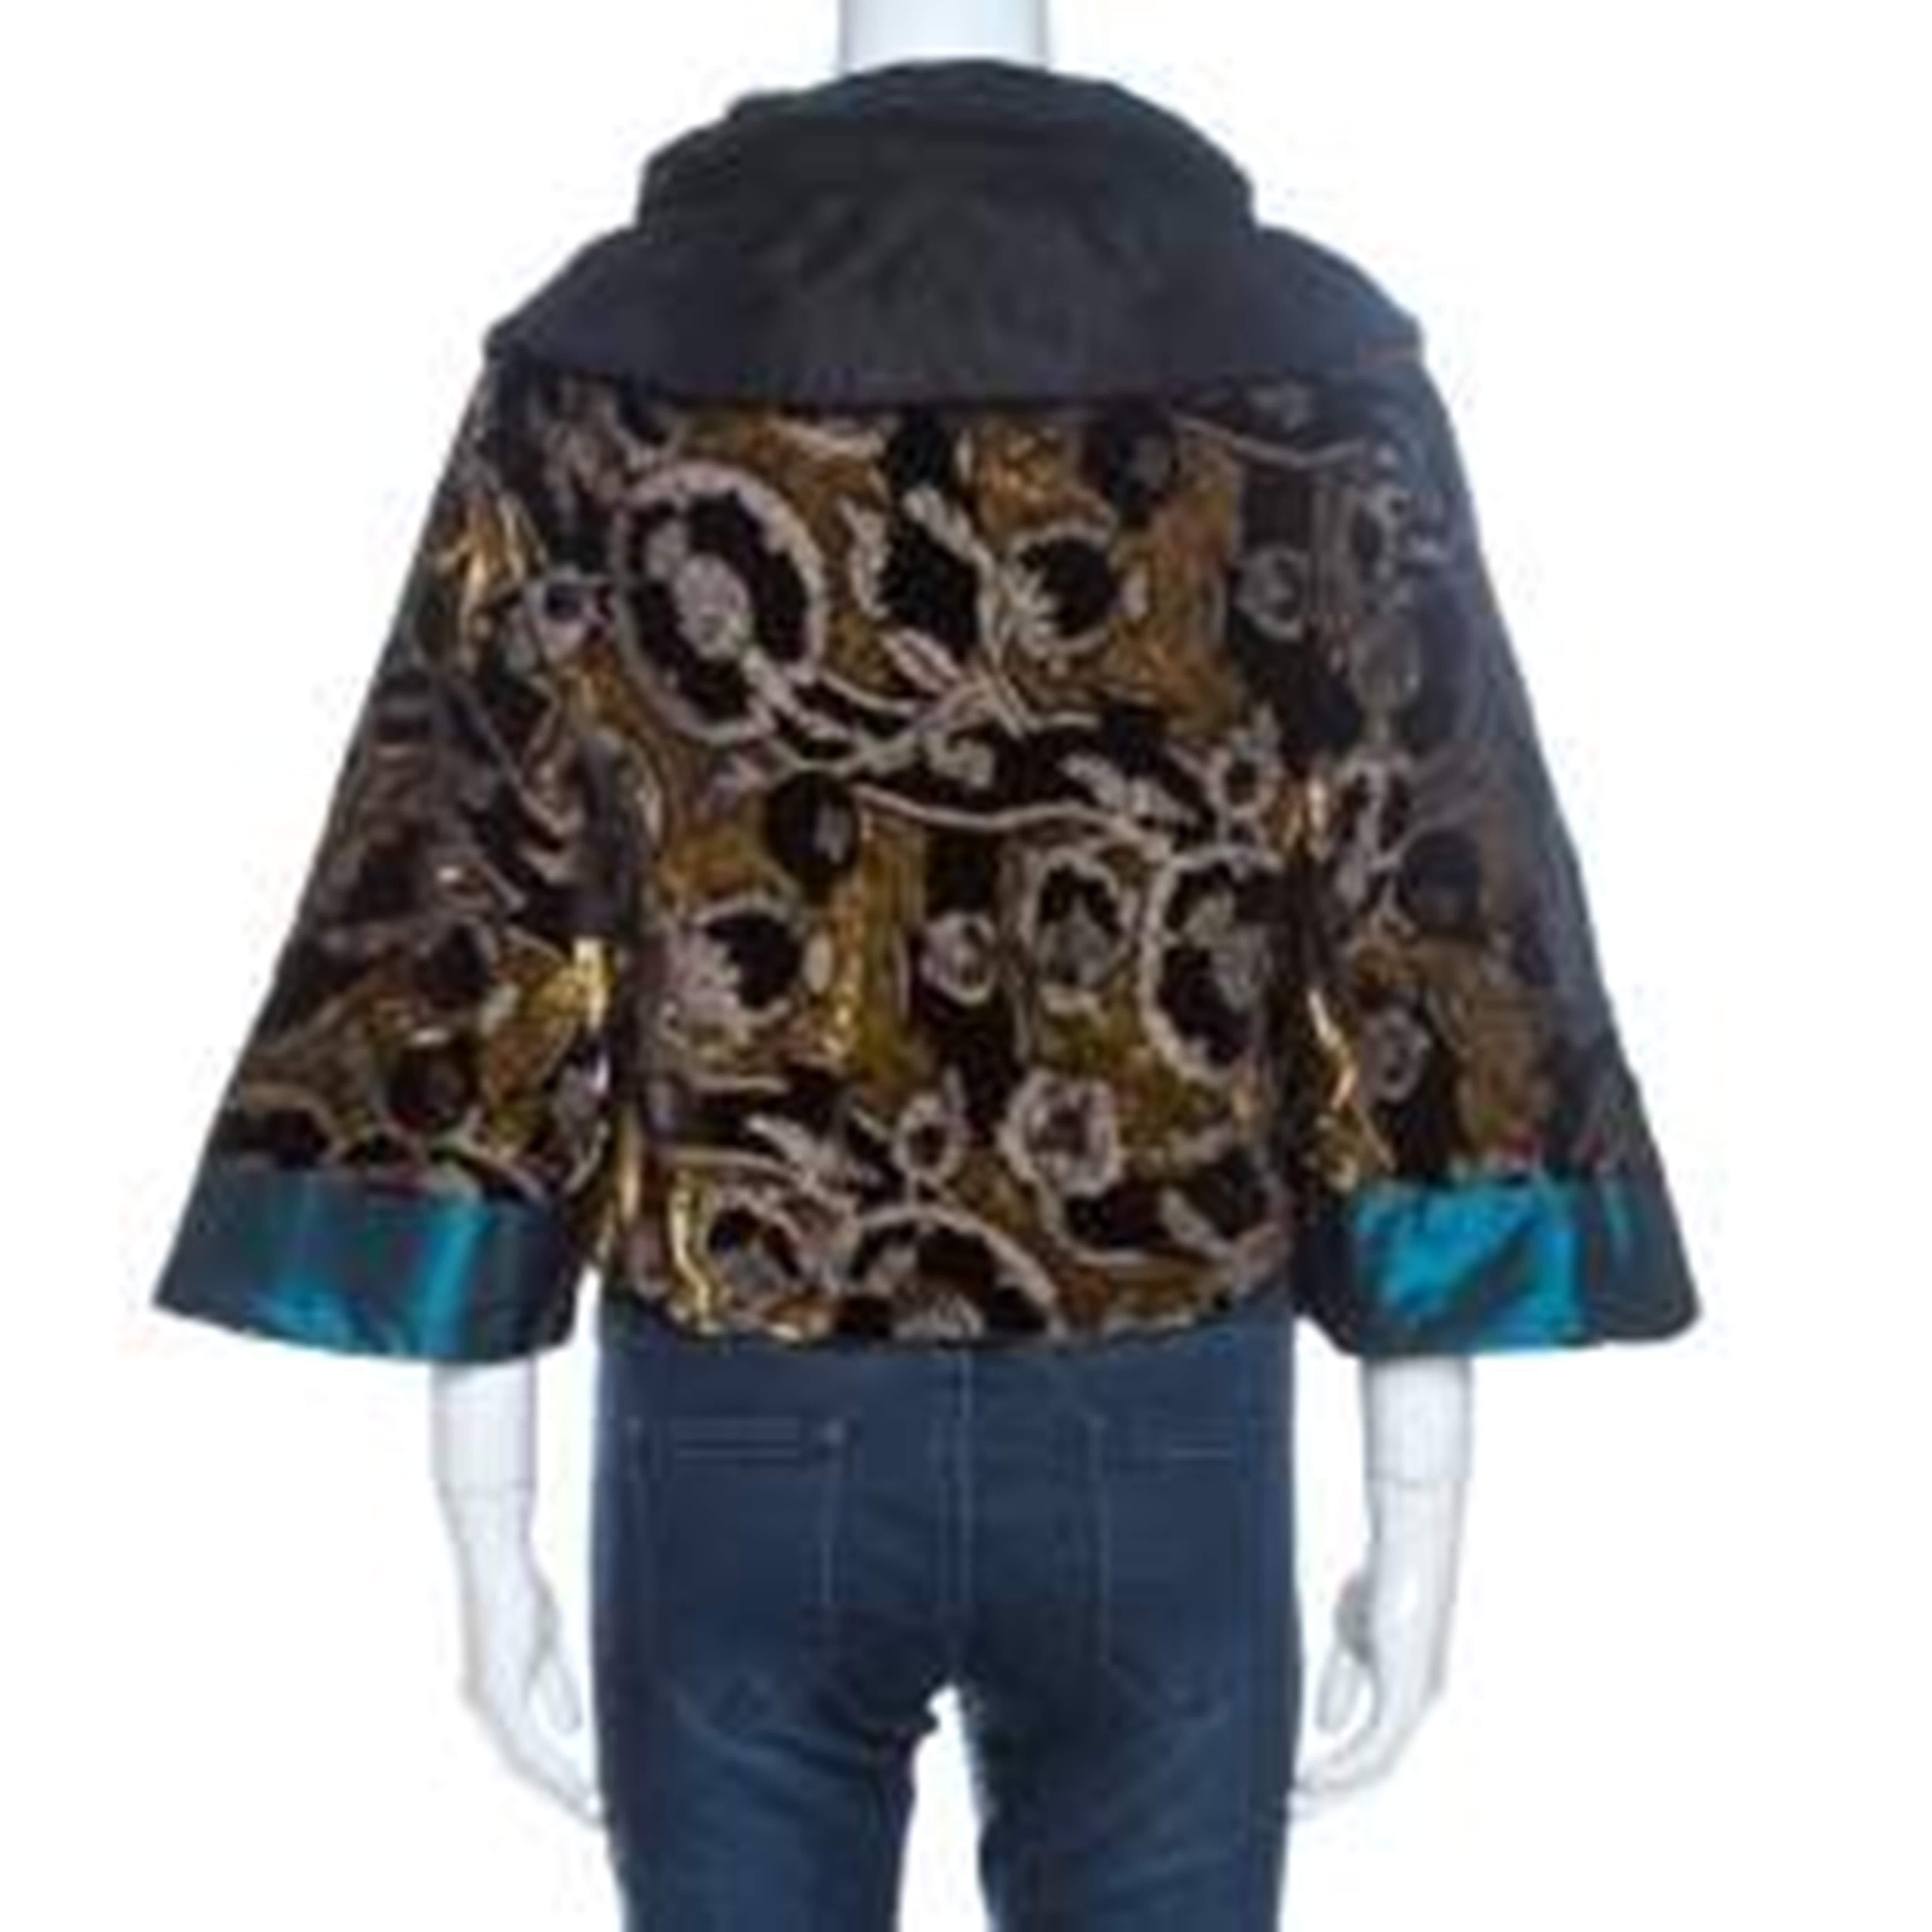 Trust Etro to create a piece that makes is a fine blend of sophistication and playfulness. Crafted from quality materials, it comes with a 100% silk lining. This velvet kimono jacket is a luxurious creation that flaunts a multicolored jacquard